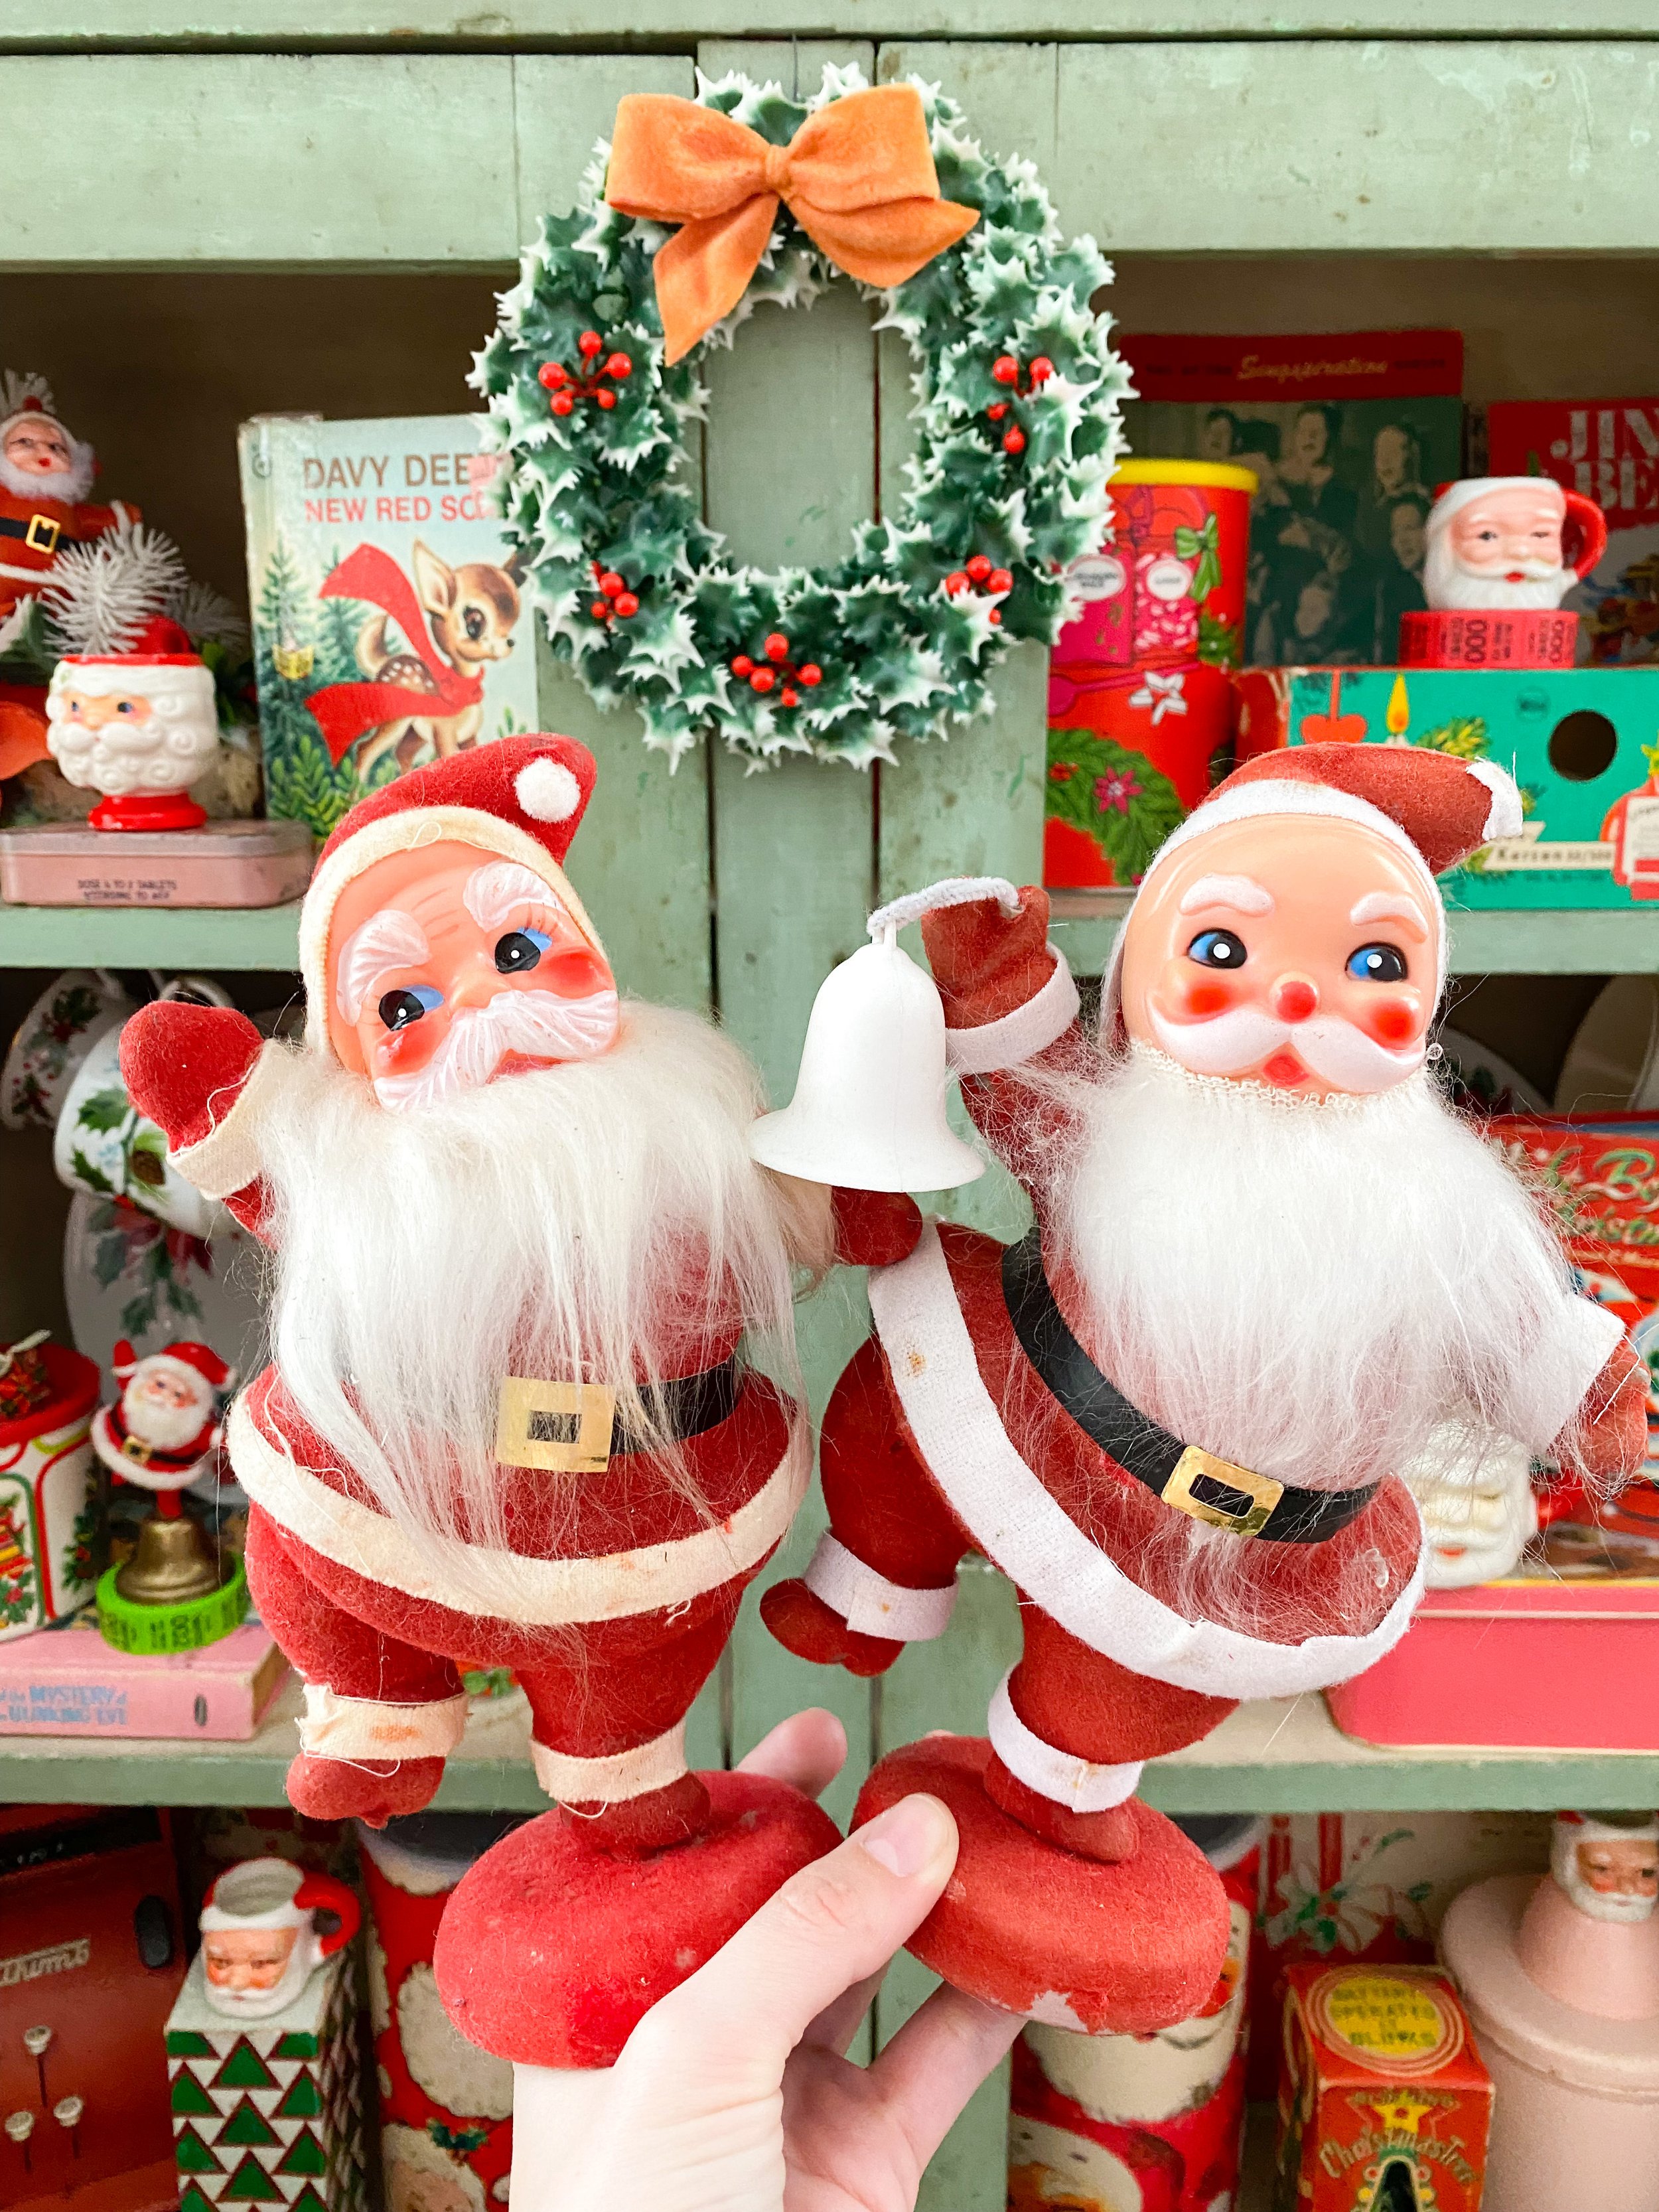 Best vintage Christmas items to decorate with